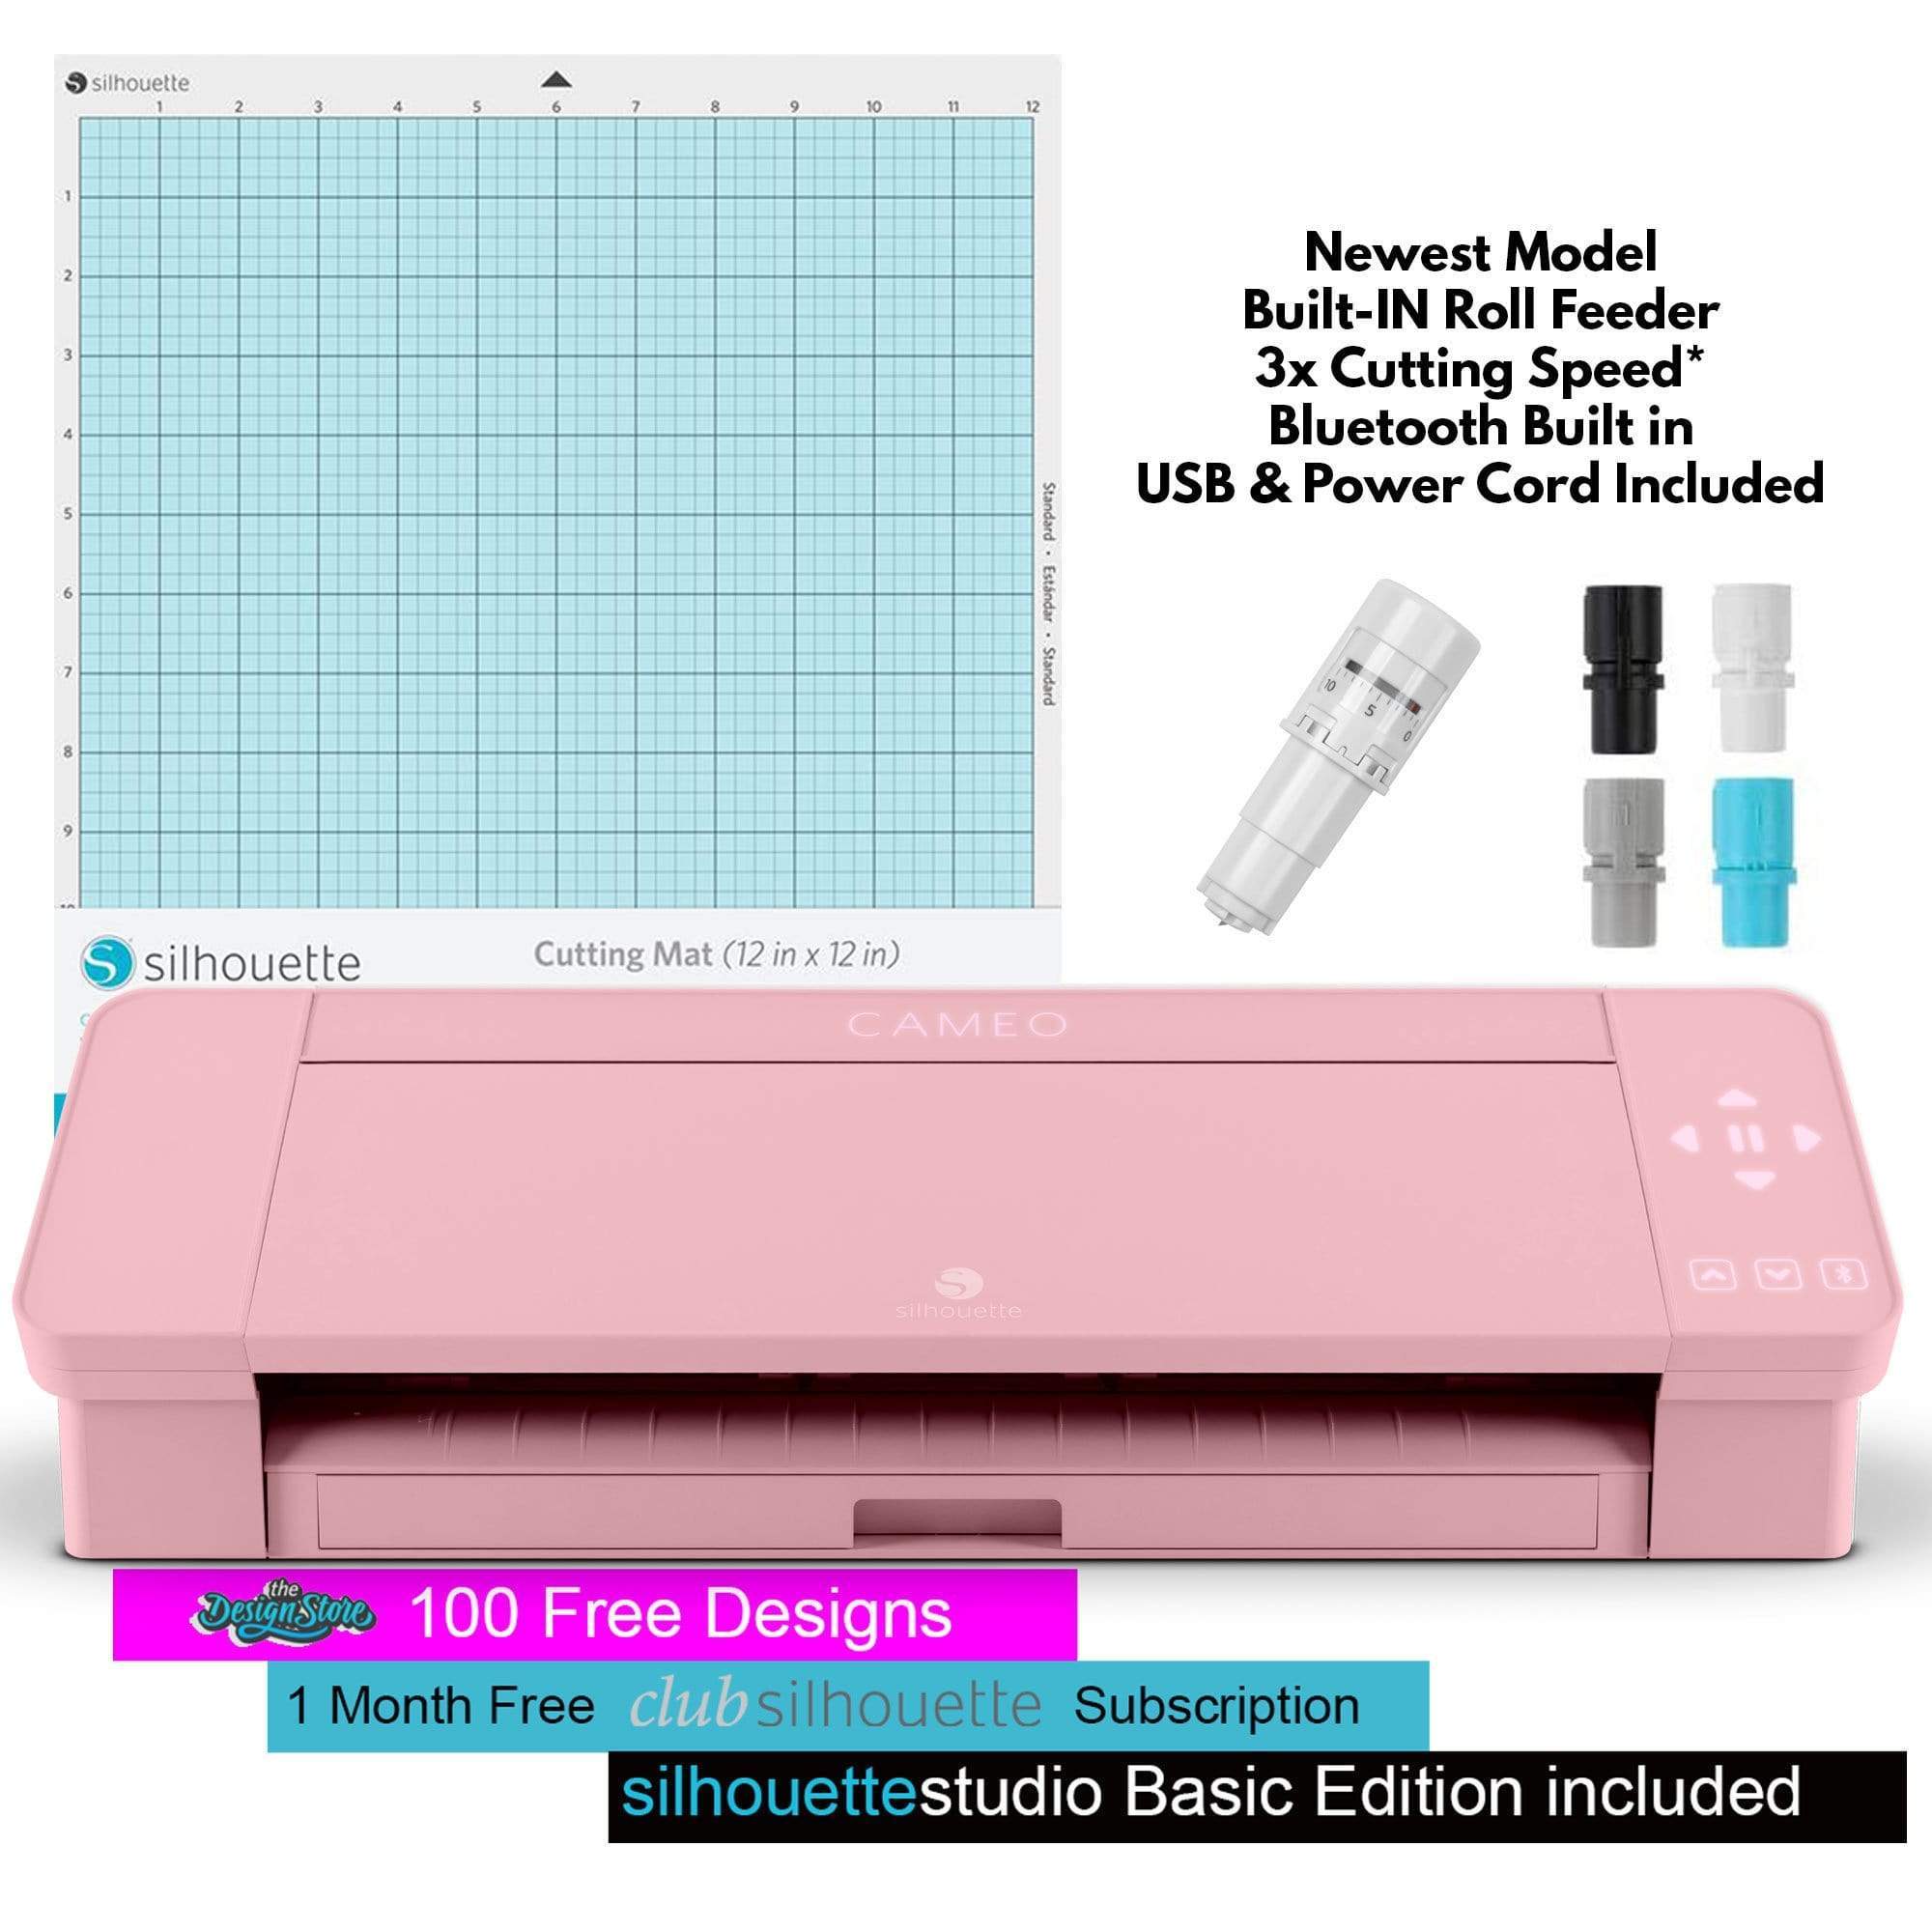 Silhouette America Craft Cutters Silhouette Cameo 4 Vinyl Cutting Machine 12" Pink Edition- Reconditioned